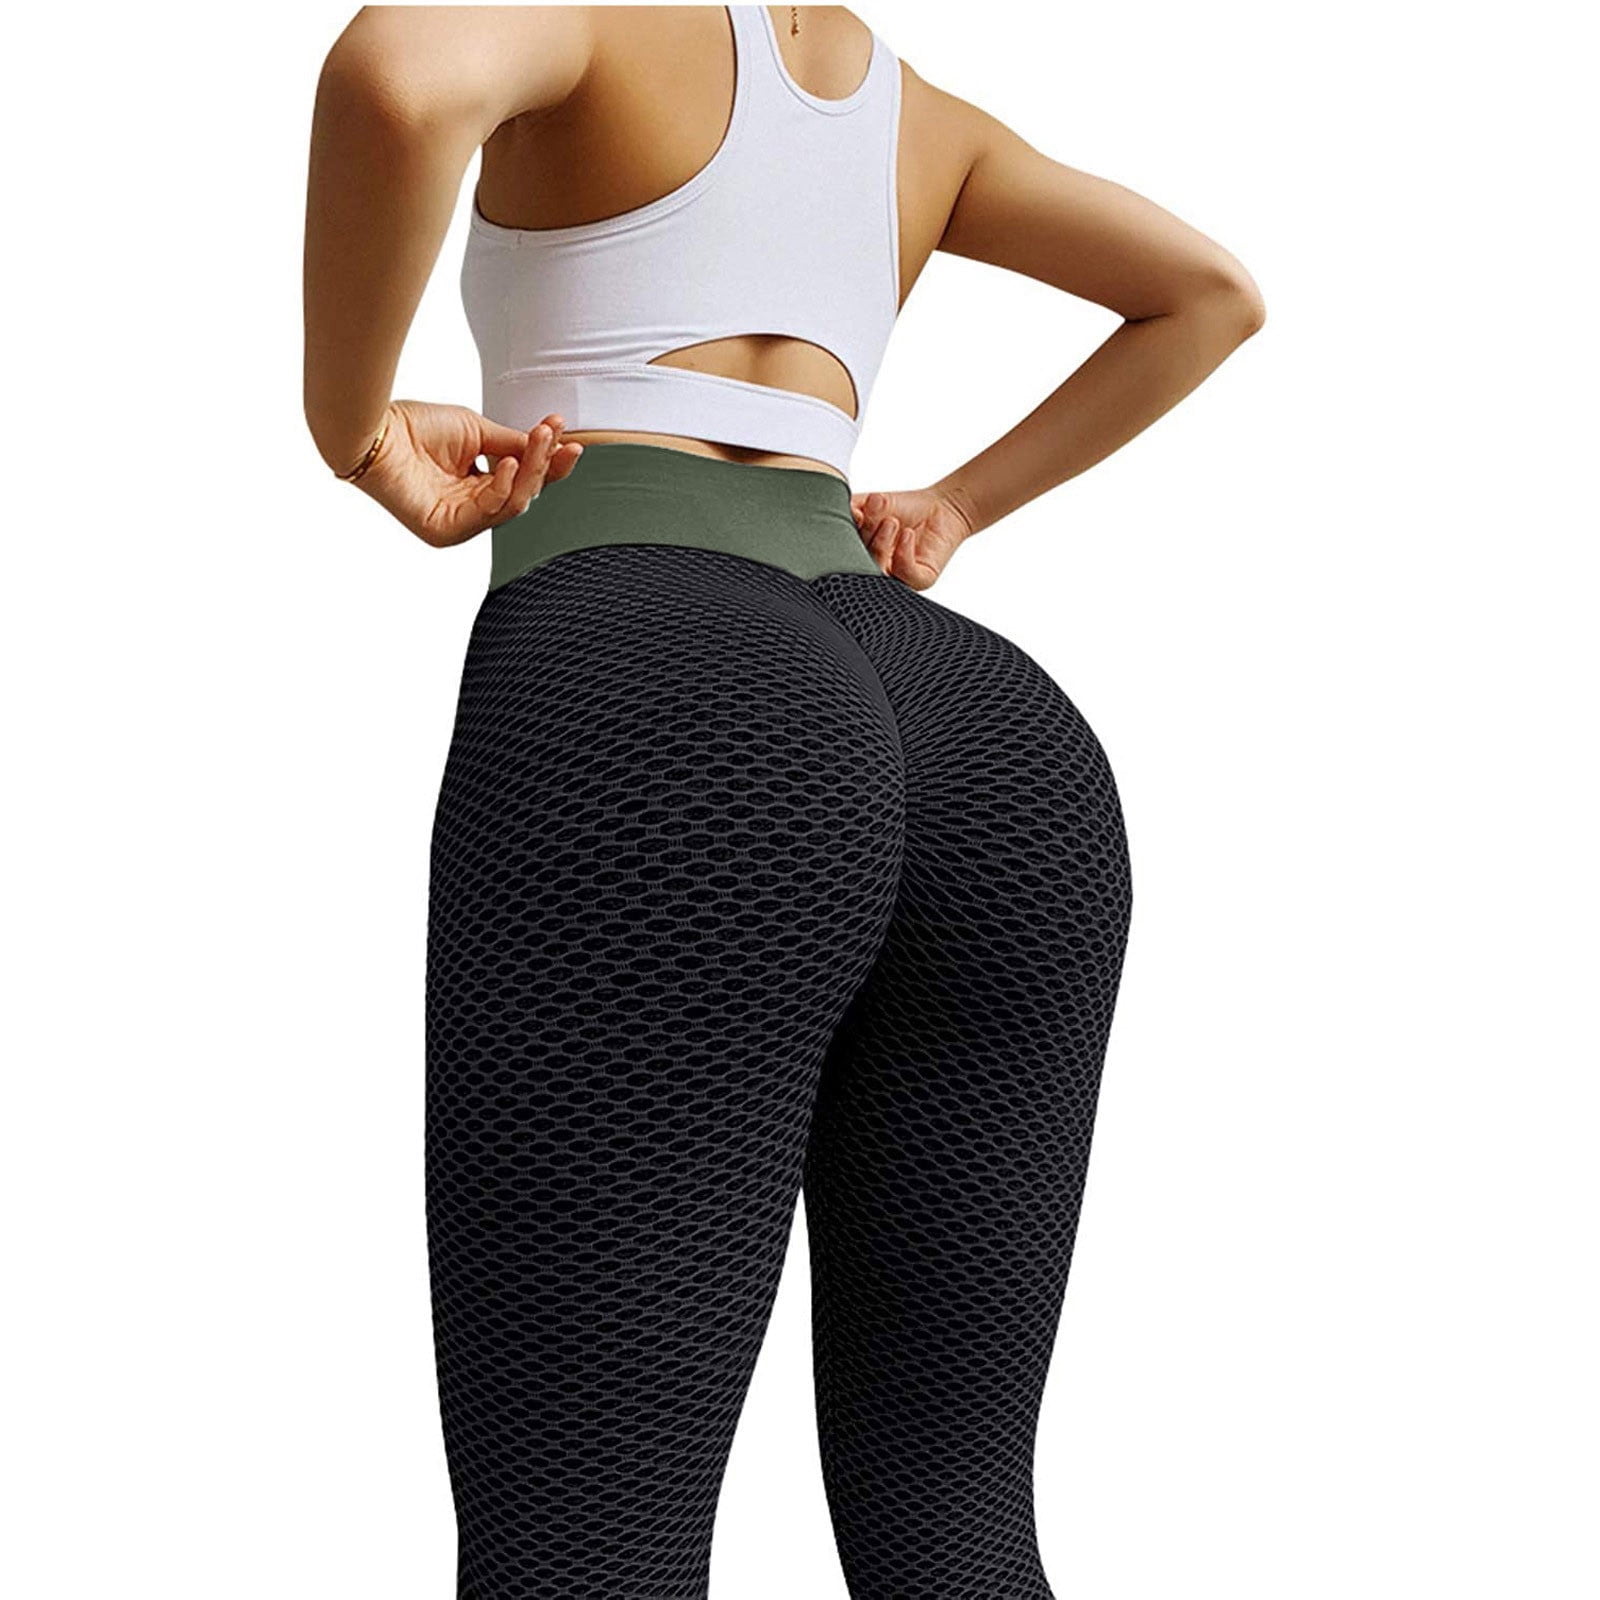 HAPIMO Sales Women's Yoga Pants High Waist Tummy Control Workout Pants Hip  Lift Tights Stretch Athletic Slimming Running Yoga Leggings for Women Black